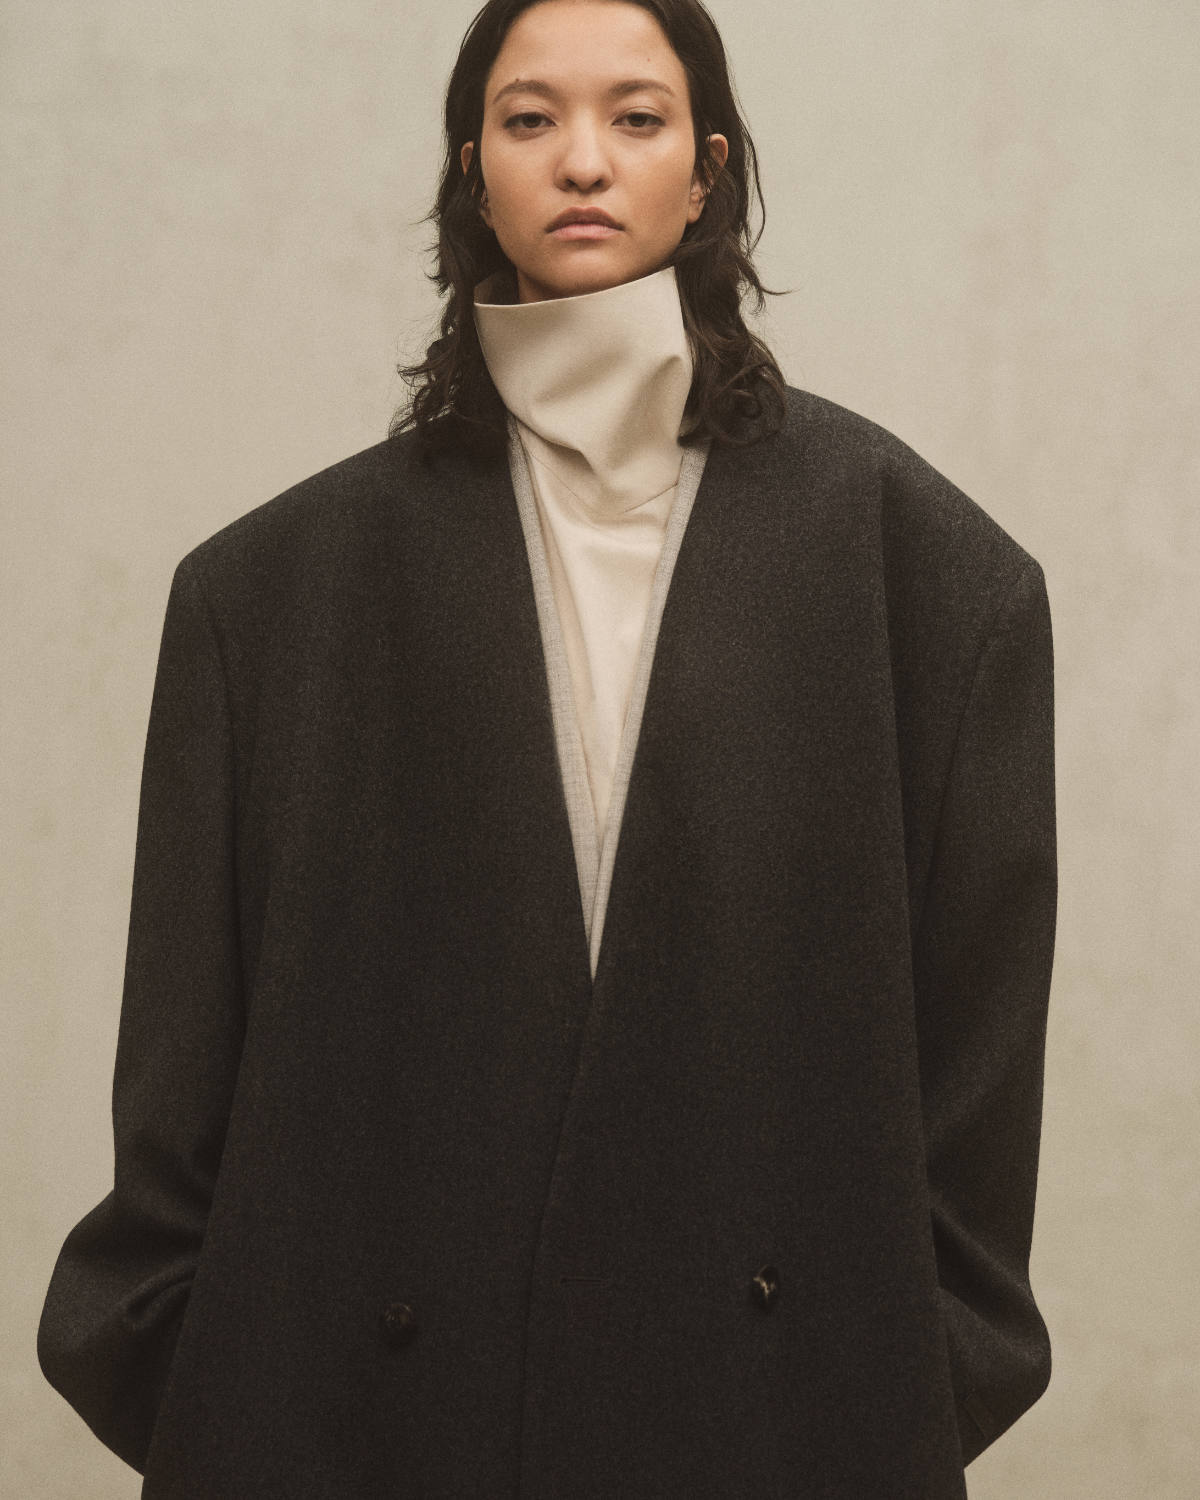 Fear Of God Presents Its New Collection 8 – Fall/Winter 2024: American Symphony